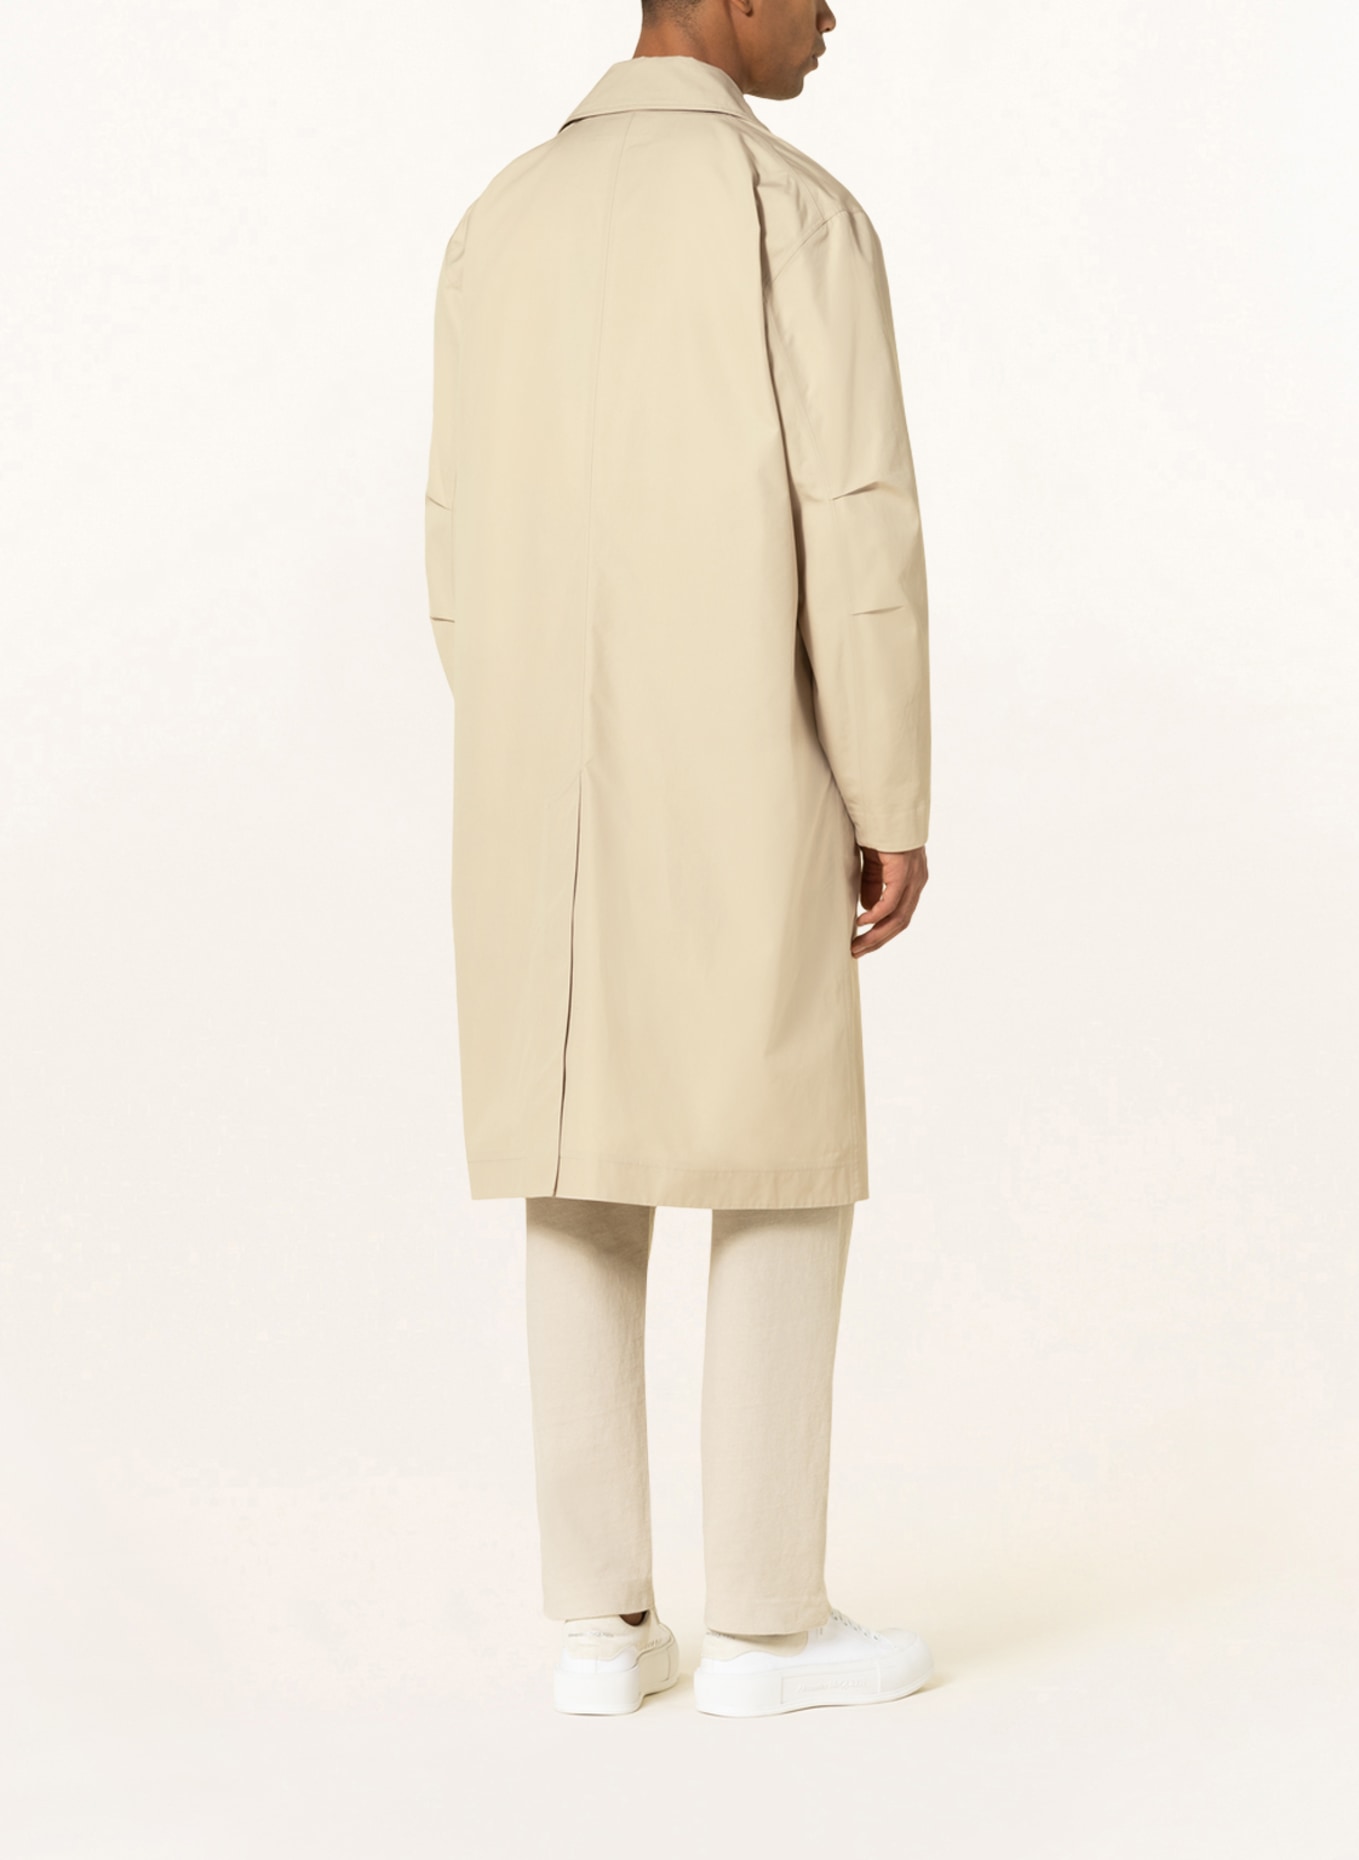 STONE ISLAND Trench coat GHOST, Color: BEIGE (Image 3)